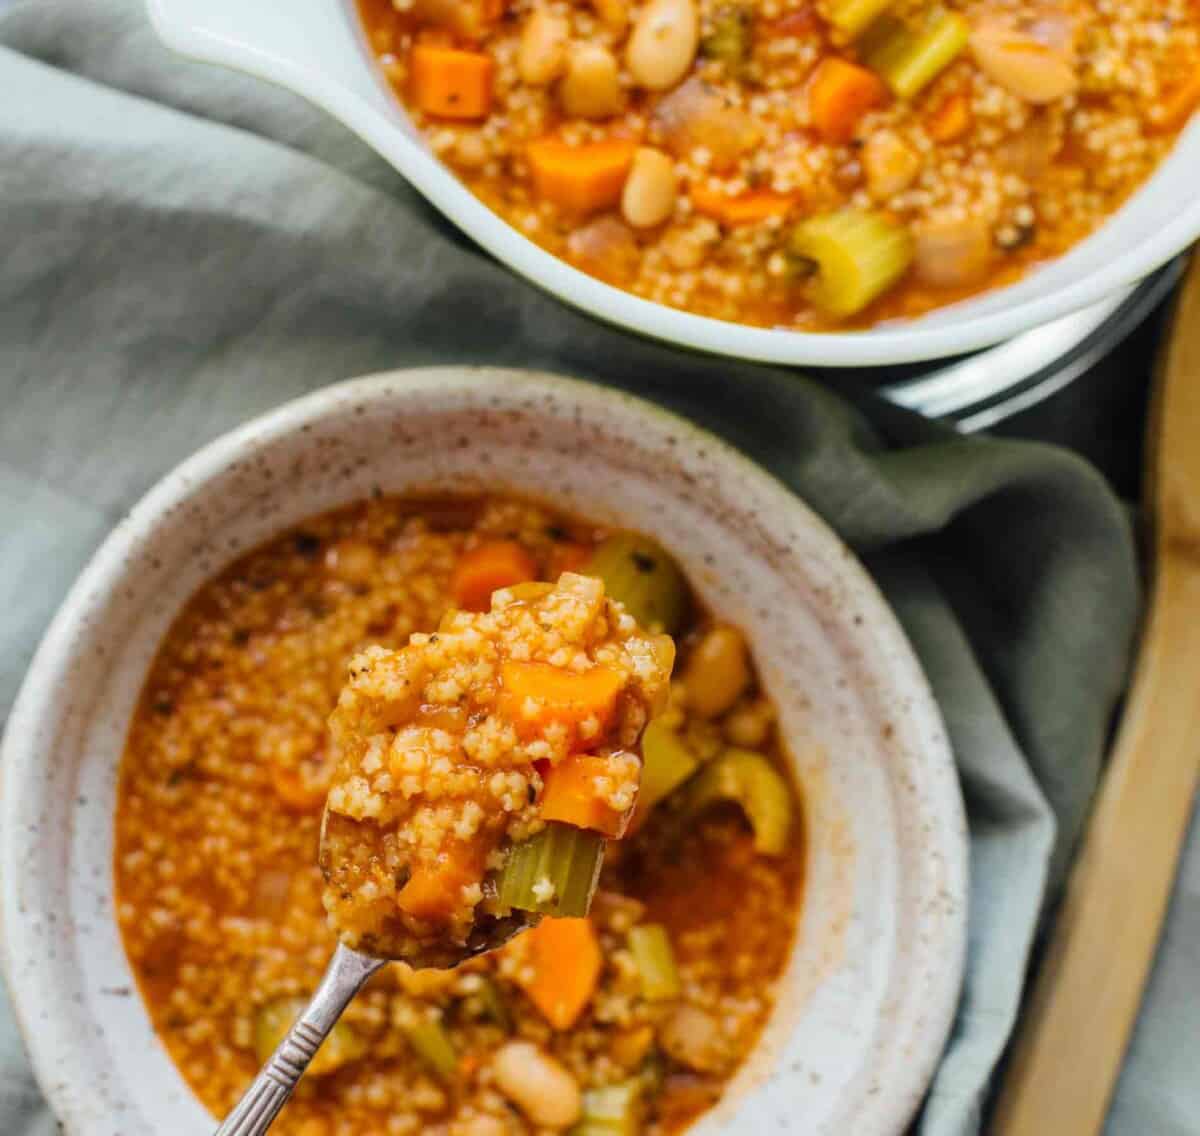 Stay cozy and warm with this Instant Pot minestrone soup that comes together in less than 45 minutes! You will absolutely love how flavorful and easy this comes together!